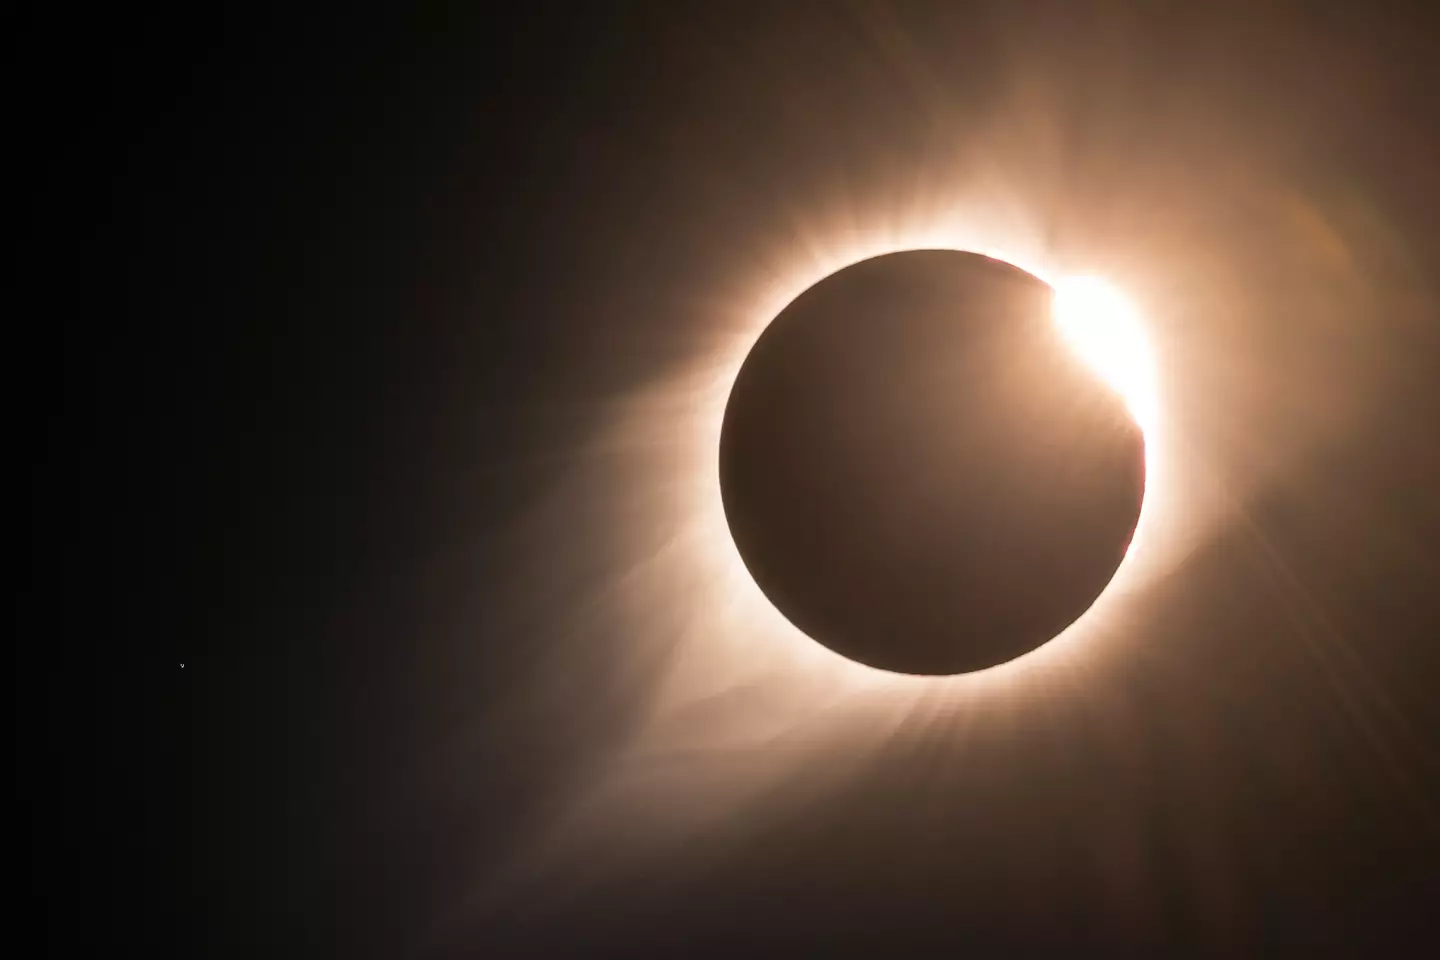 Scientists have issued a major warning ahead of the solar eclipse which could prove deadly for some. john finney photography / Getty Images